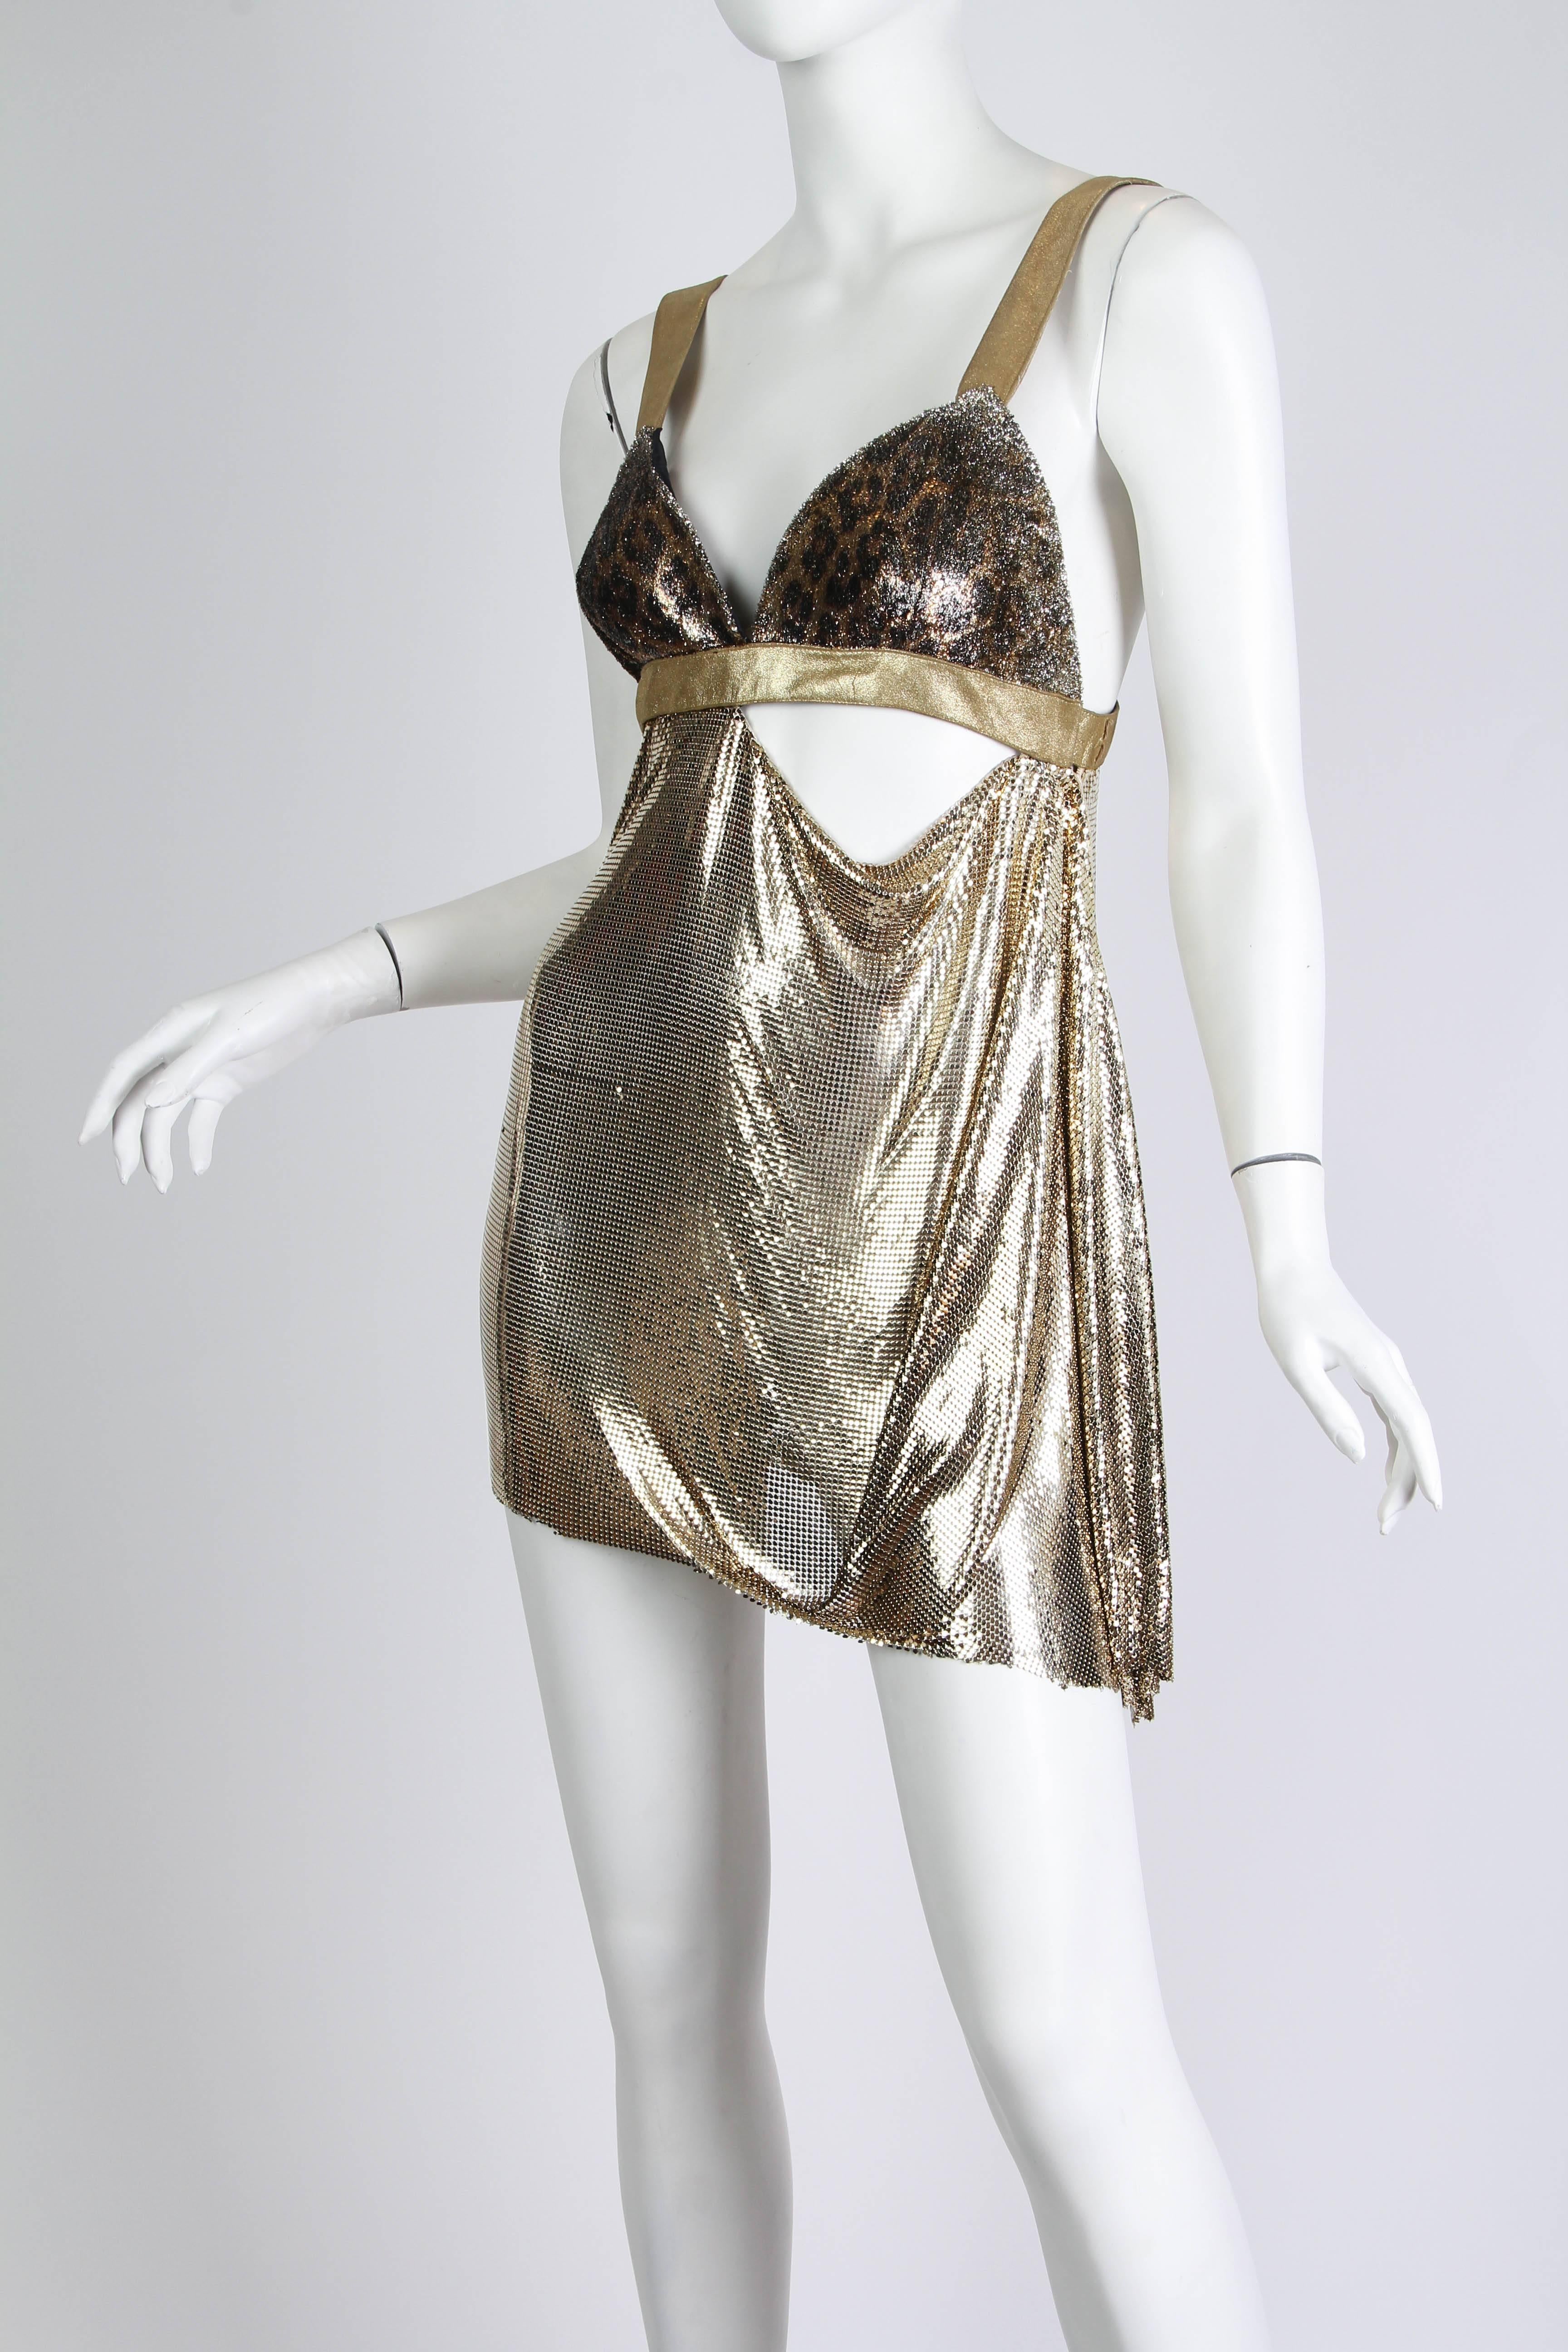 Women's 1990s Gianni Versace Gold Metal Mesh and Leopard Ad Campaign dress